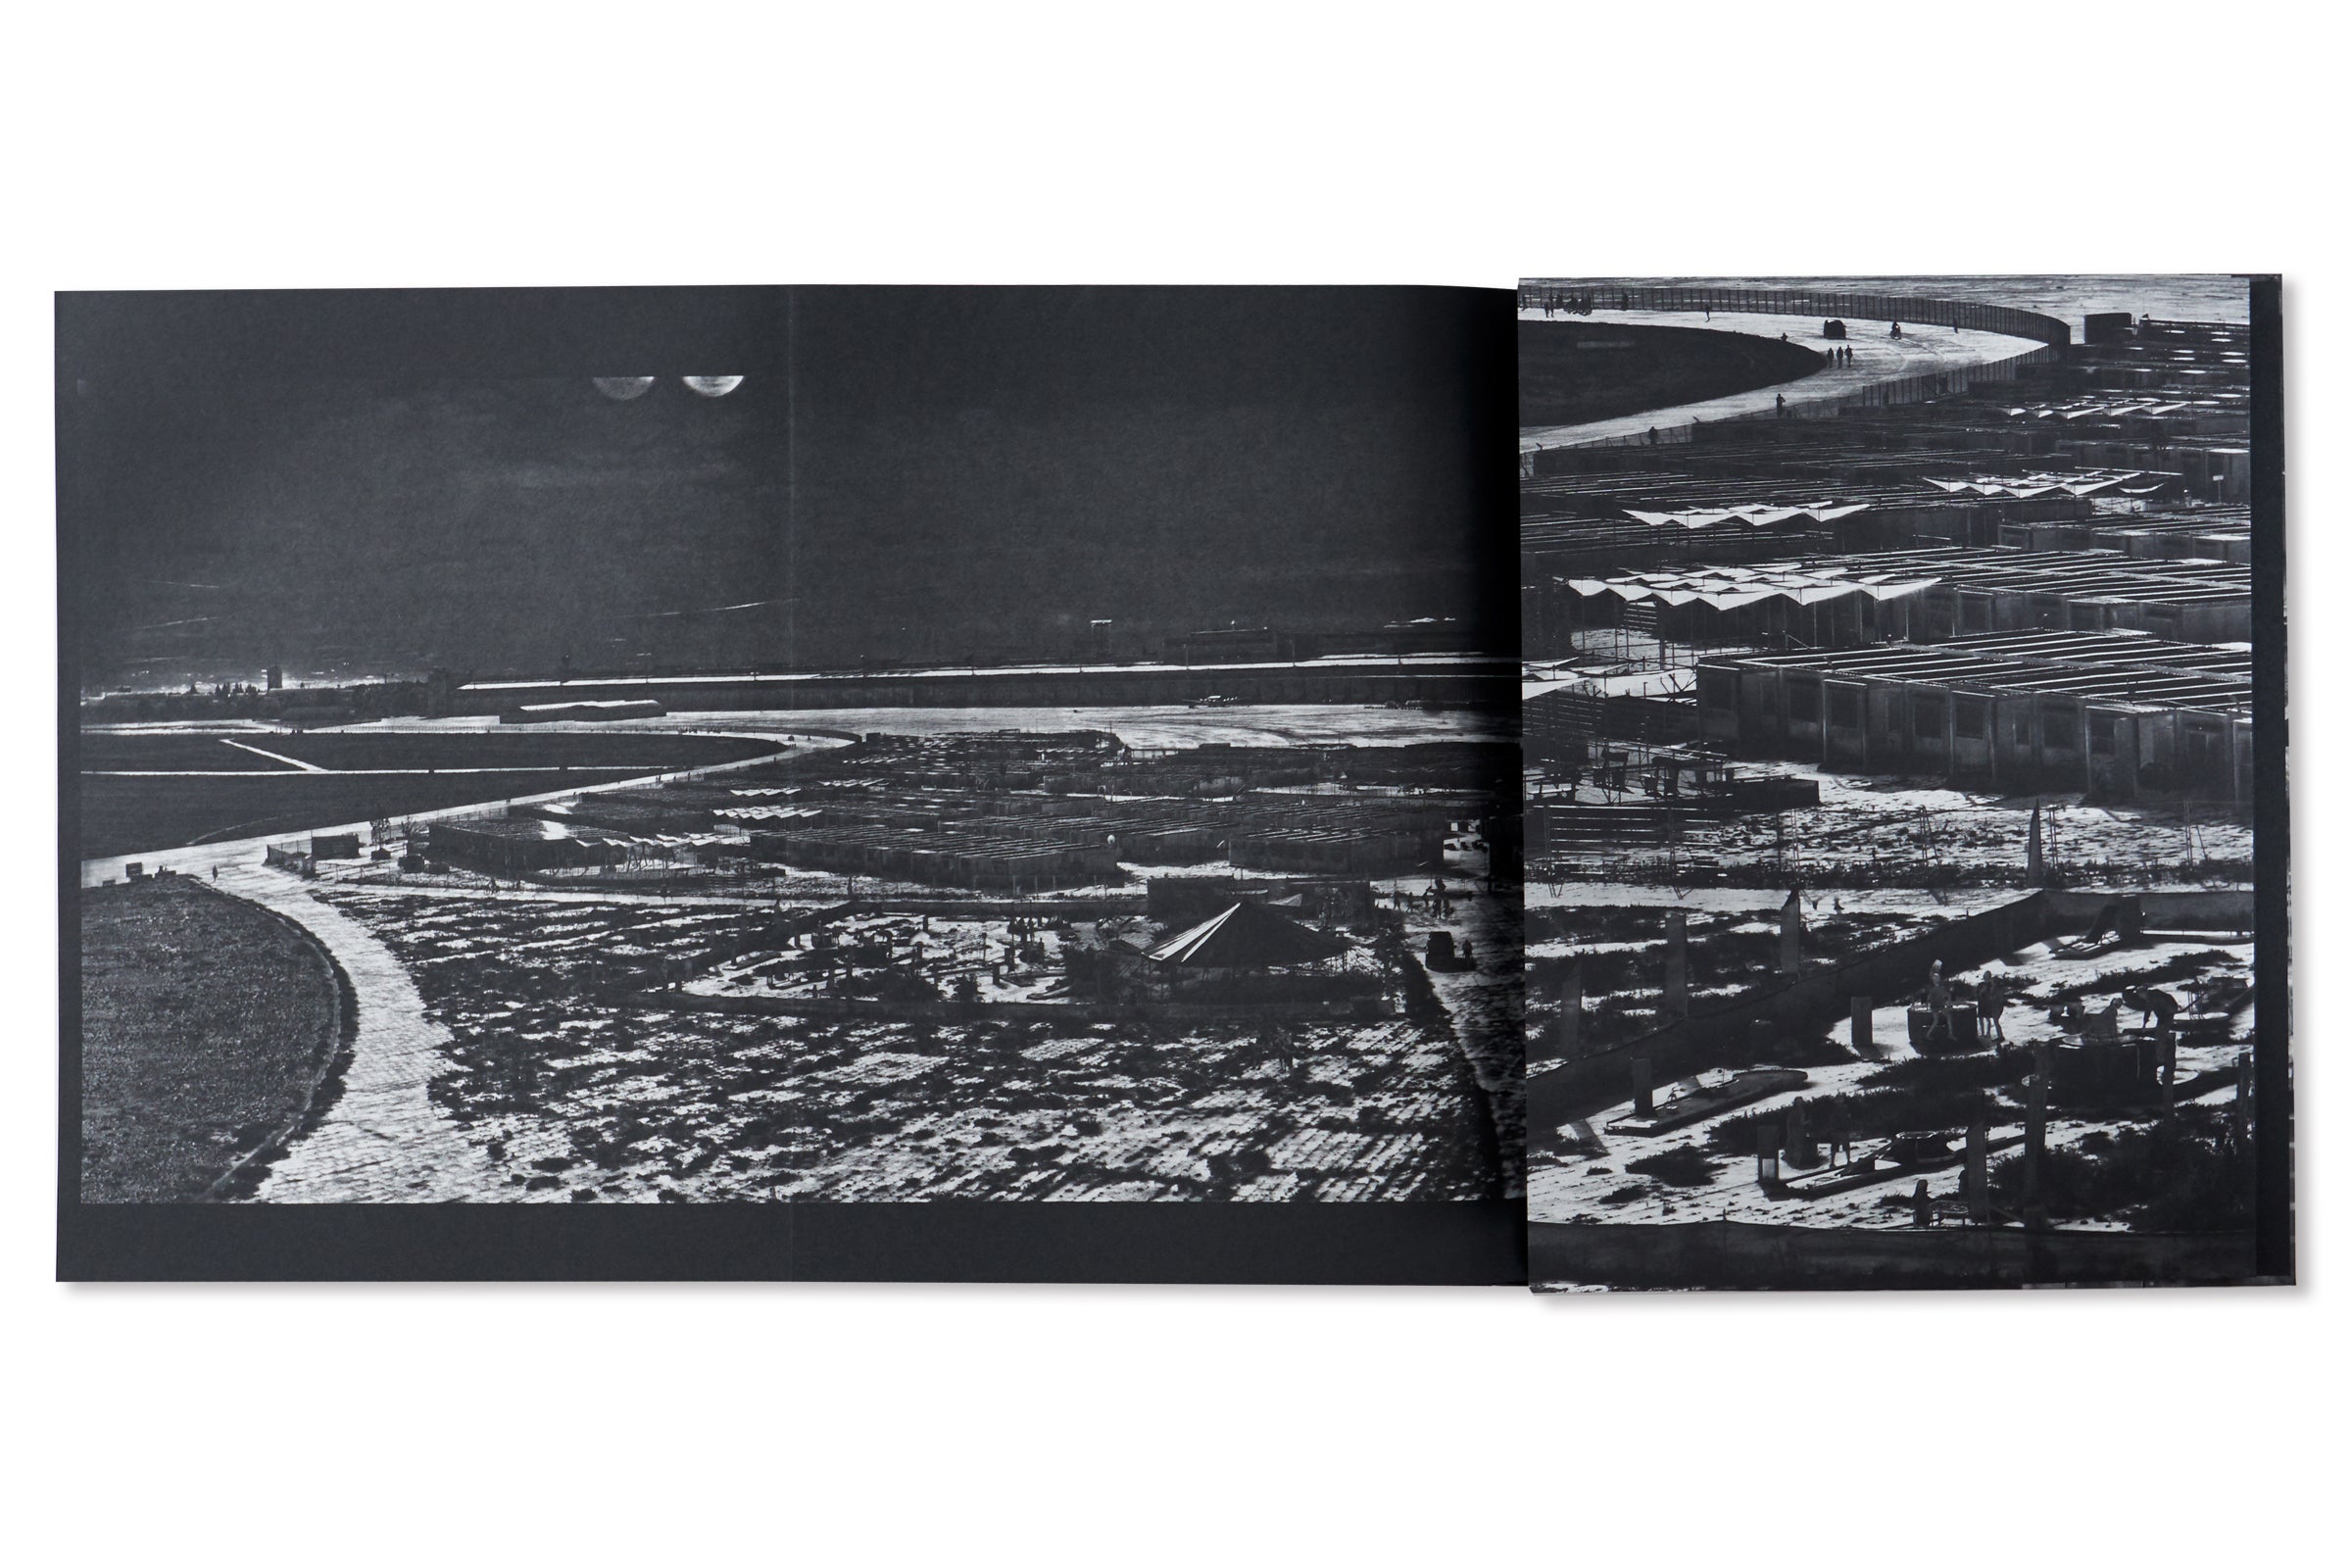 THE CASTLE by Richard Mosse [FIRST EDITION, SECOND PRINTING]